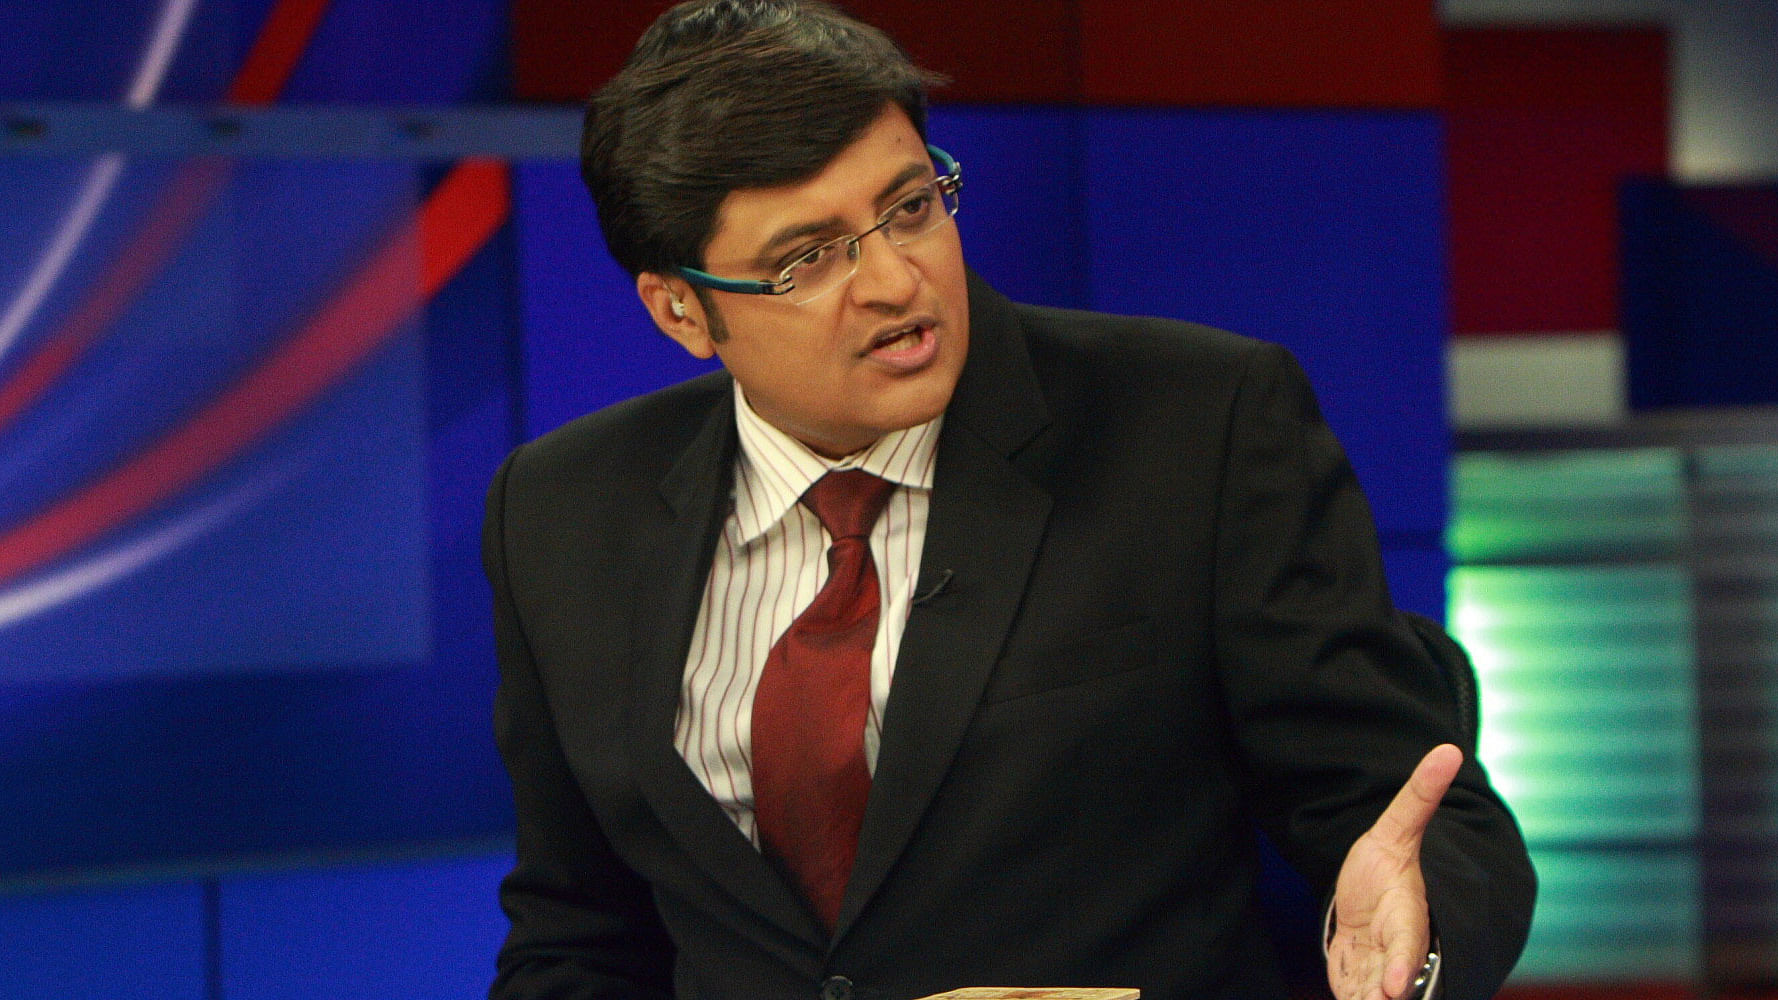 The Y-category security will need 20 guards to be deployed with Goswami at all times.(Photo Courtesy: <a href="http://www.youthkiawaaz.com/2016/03/arnab-goswami-is-good-for-indian-journalism/">youthkiawaaz.com</a>)